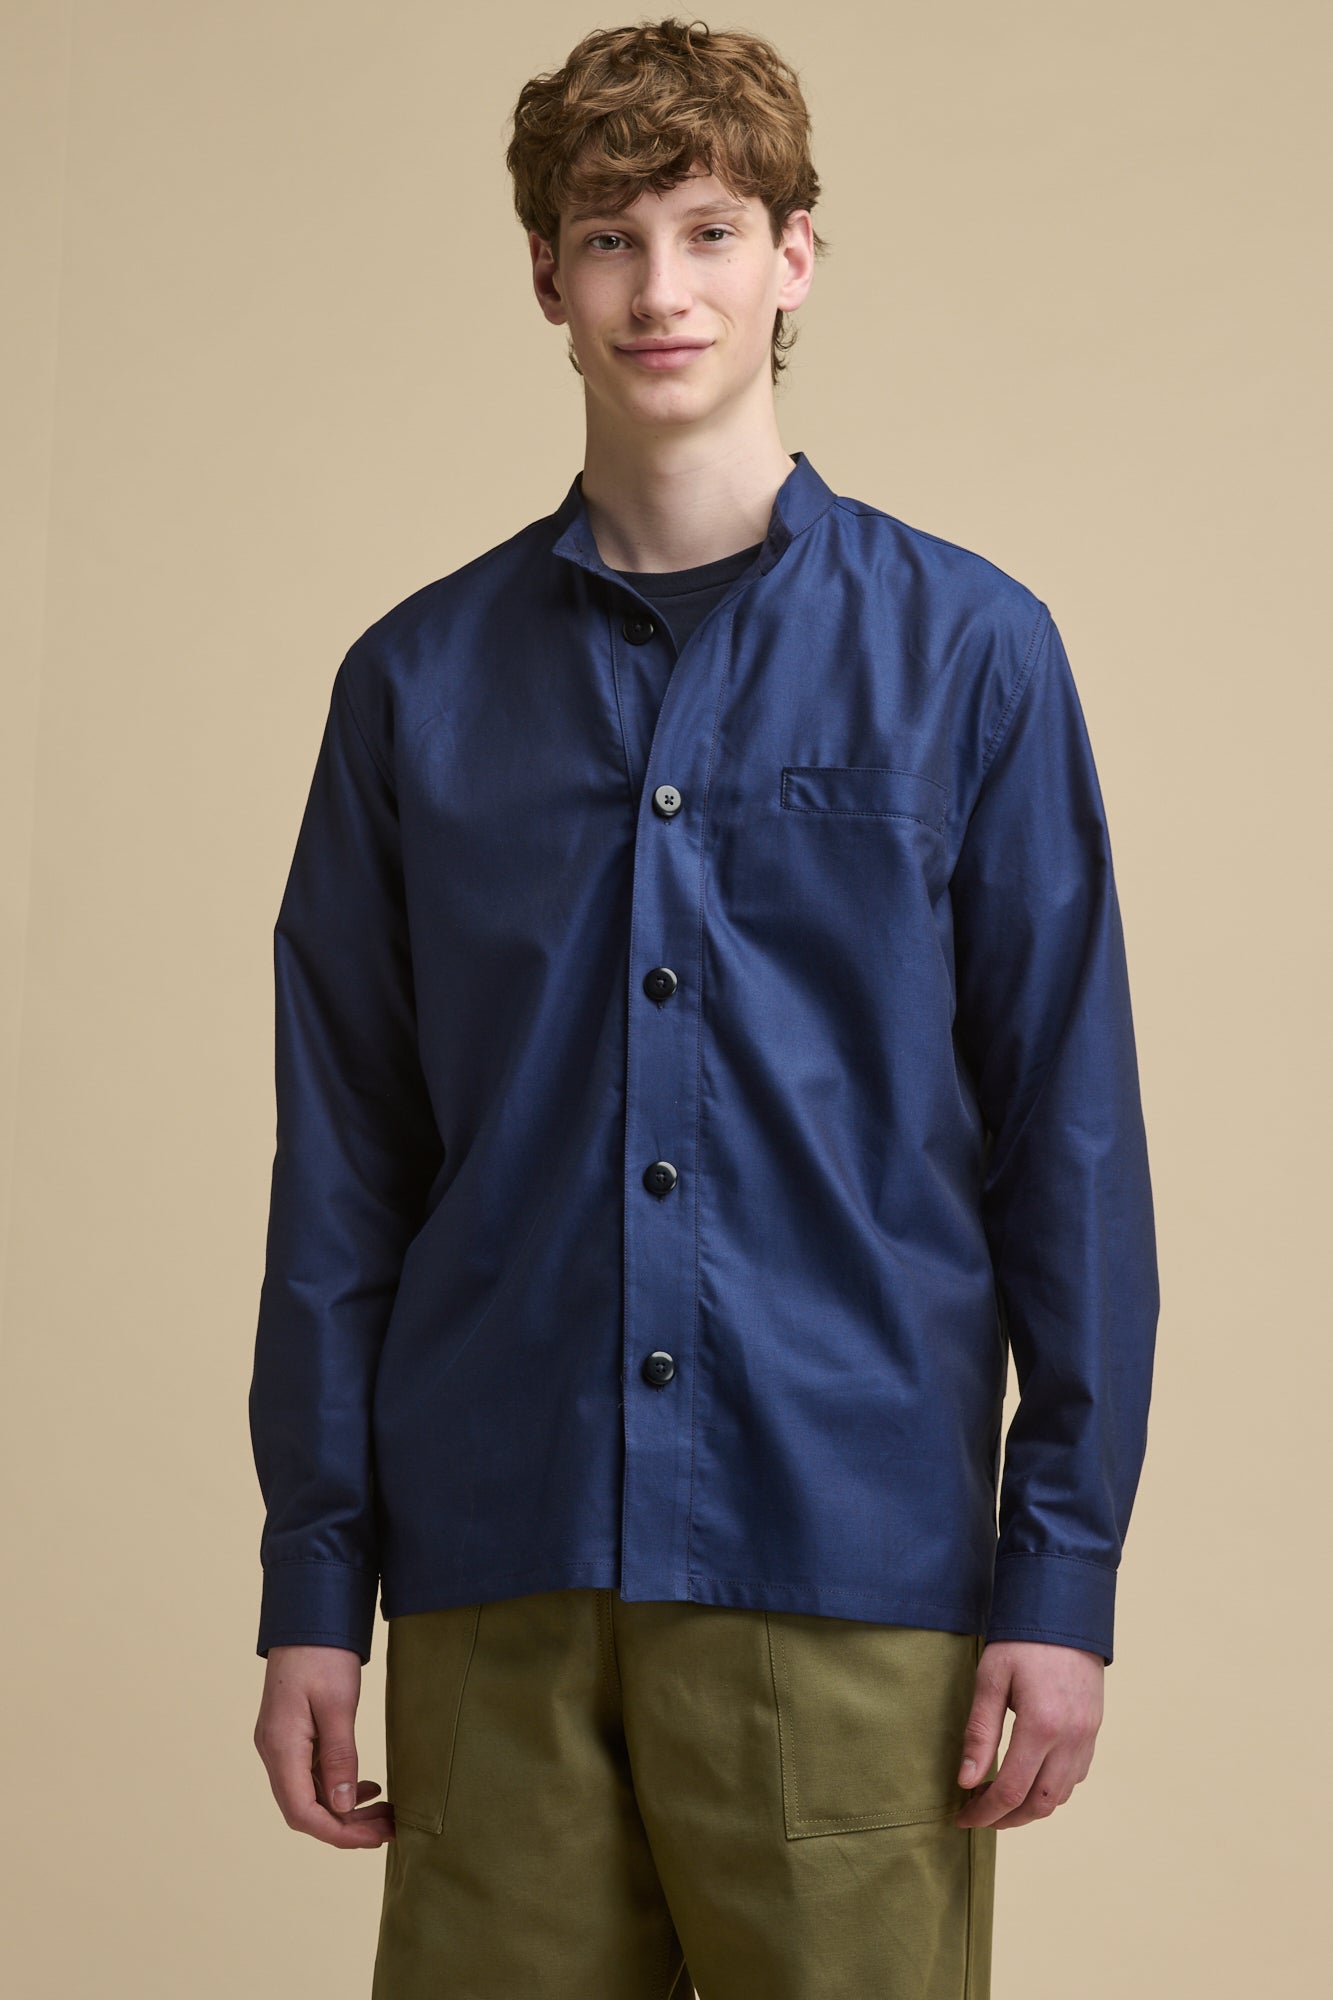 Smiley male wearing George Lightweight Collarless Overshirt in navy with top two buttons undone with navy t shirt underneath